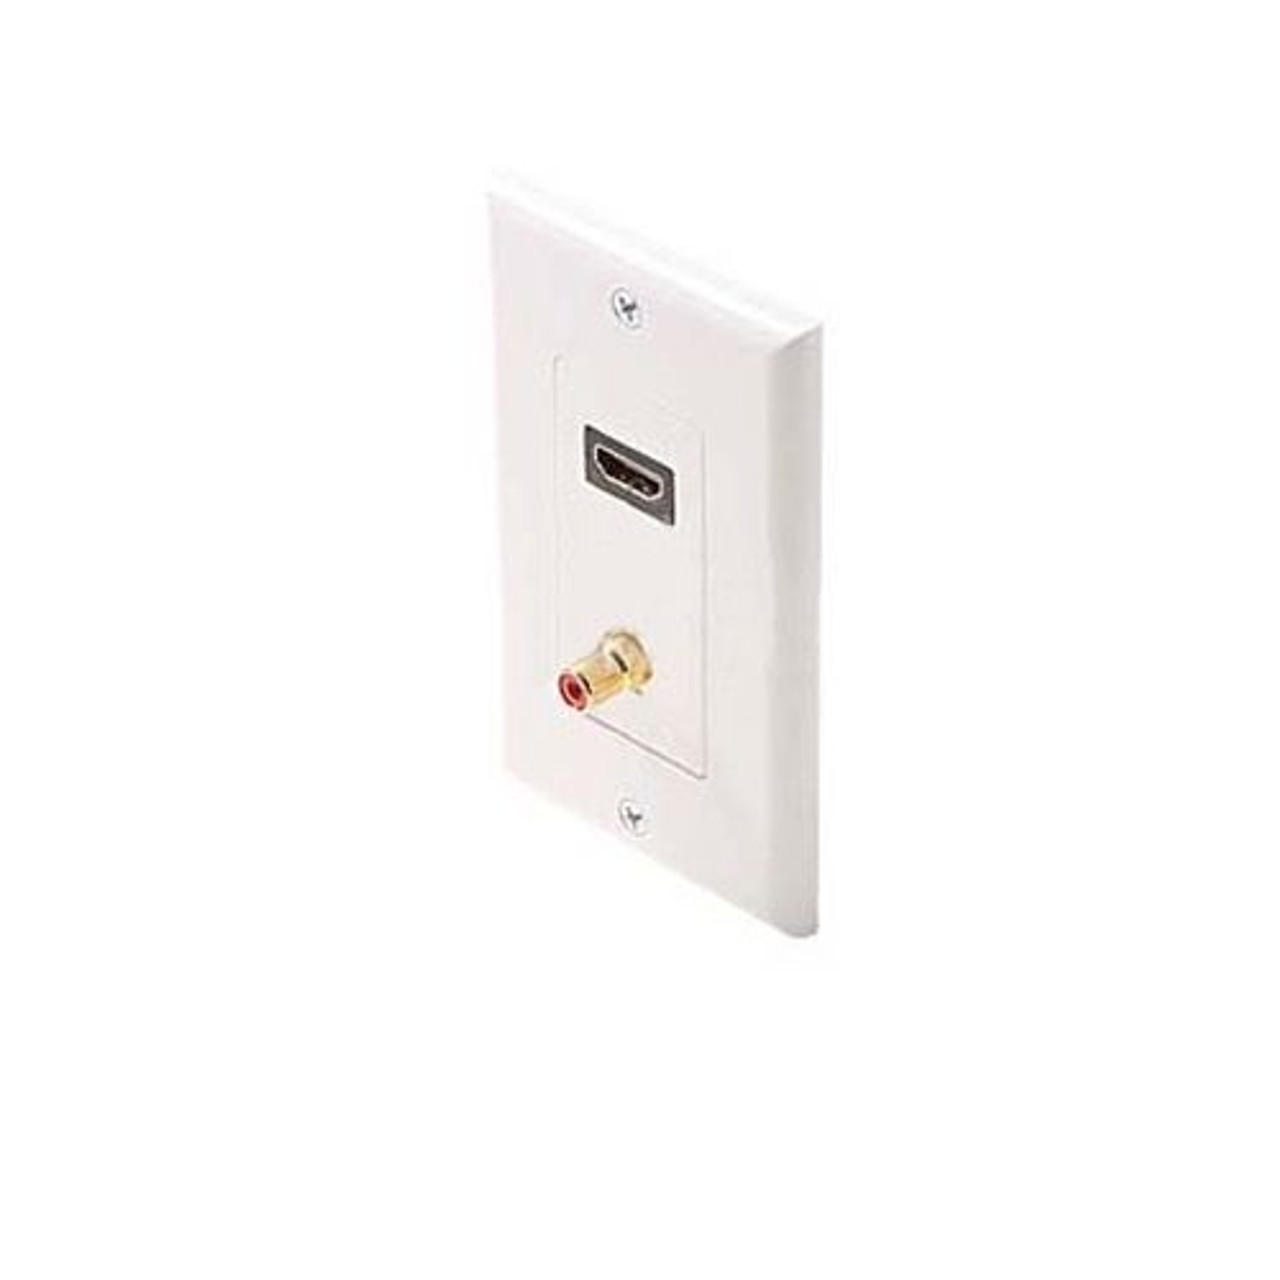 Steren 516-108WH Decorator Style HDMI Feed Thru Wall Plate with Single Red RCA Mono Audio F Gold Connector White Plate HDMI Female to HDMI Female, High Definition Multi-Media Interface HDTV Applications, Part # 516108-WH